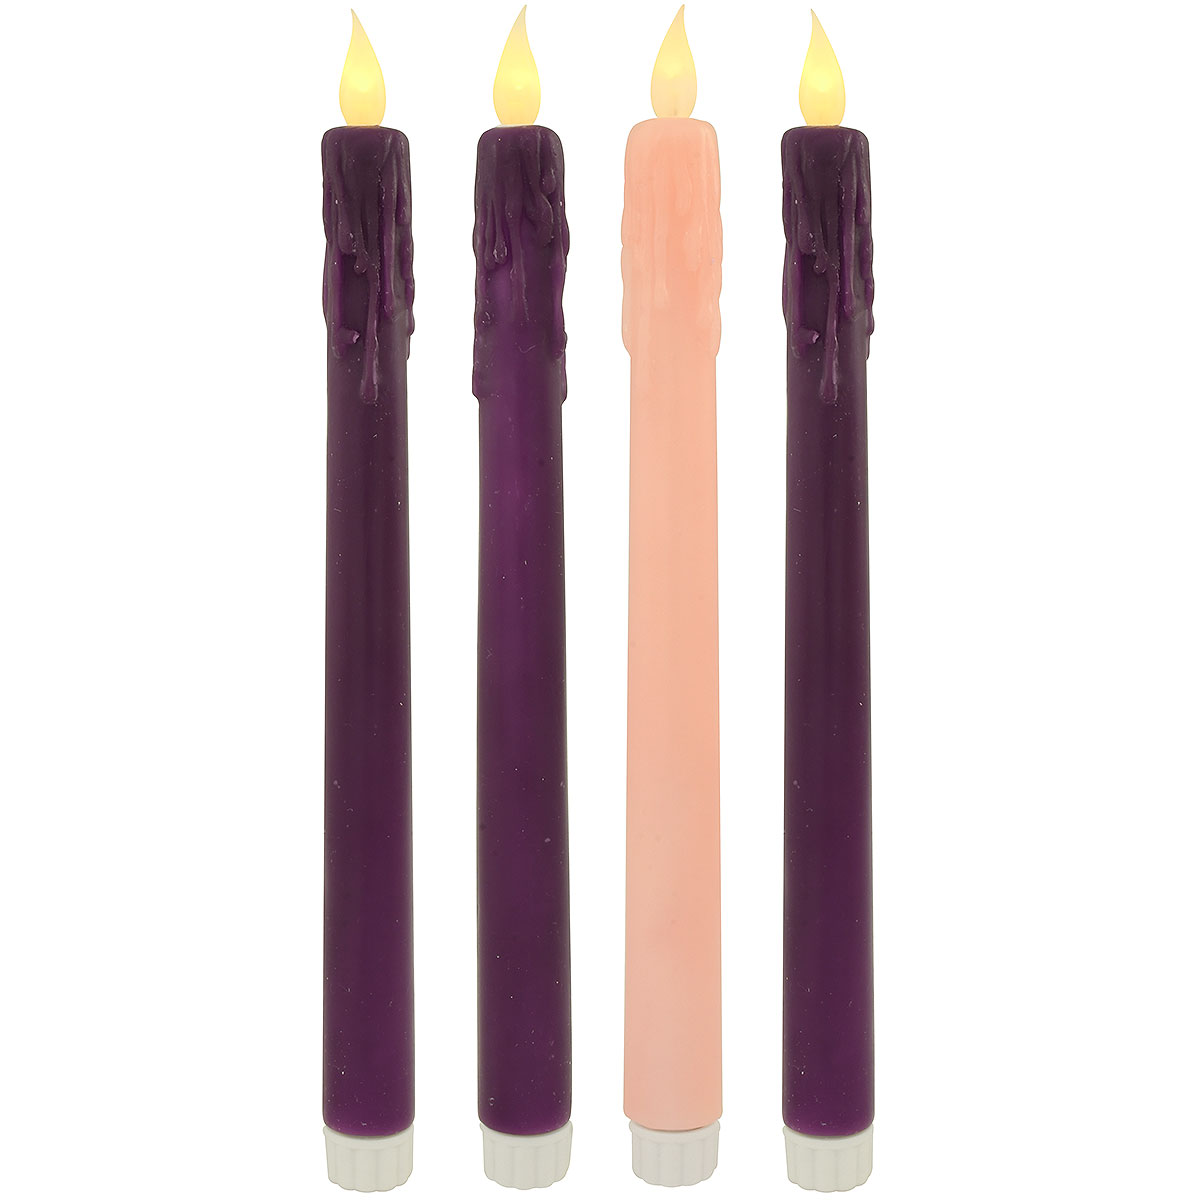 Wax Candle Light Set Of 4, Battery